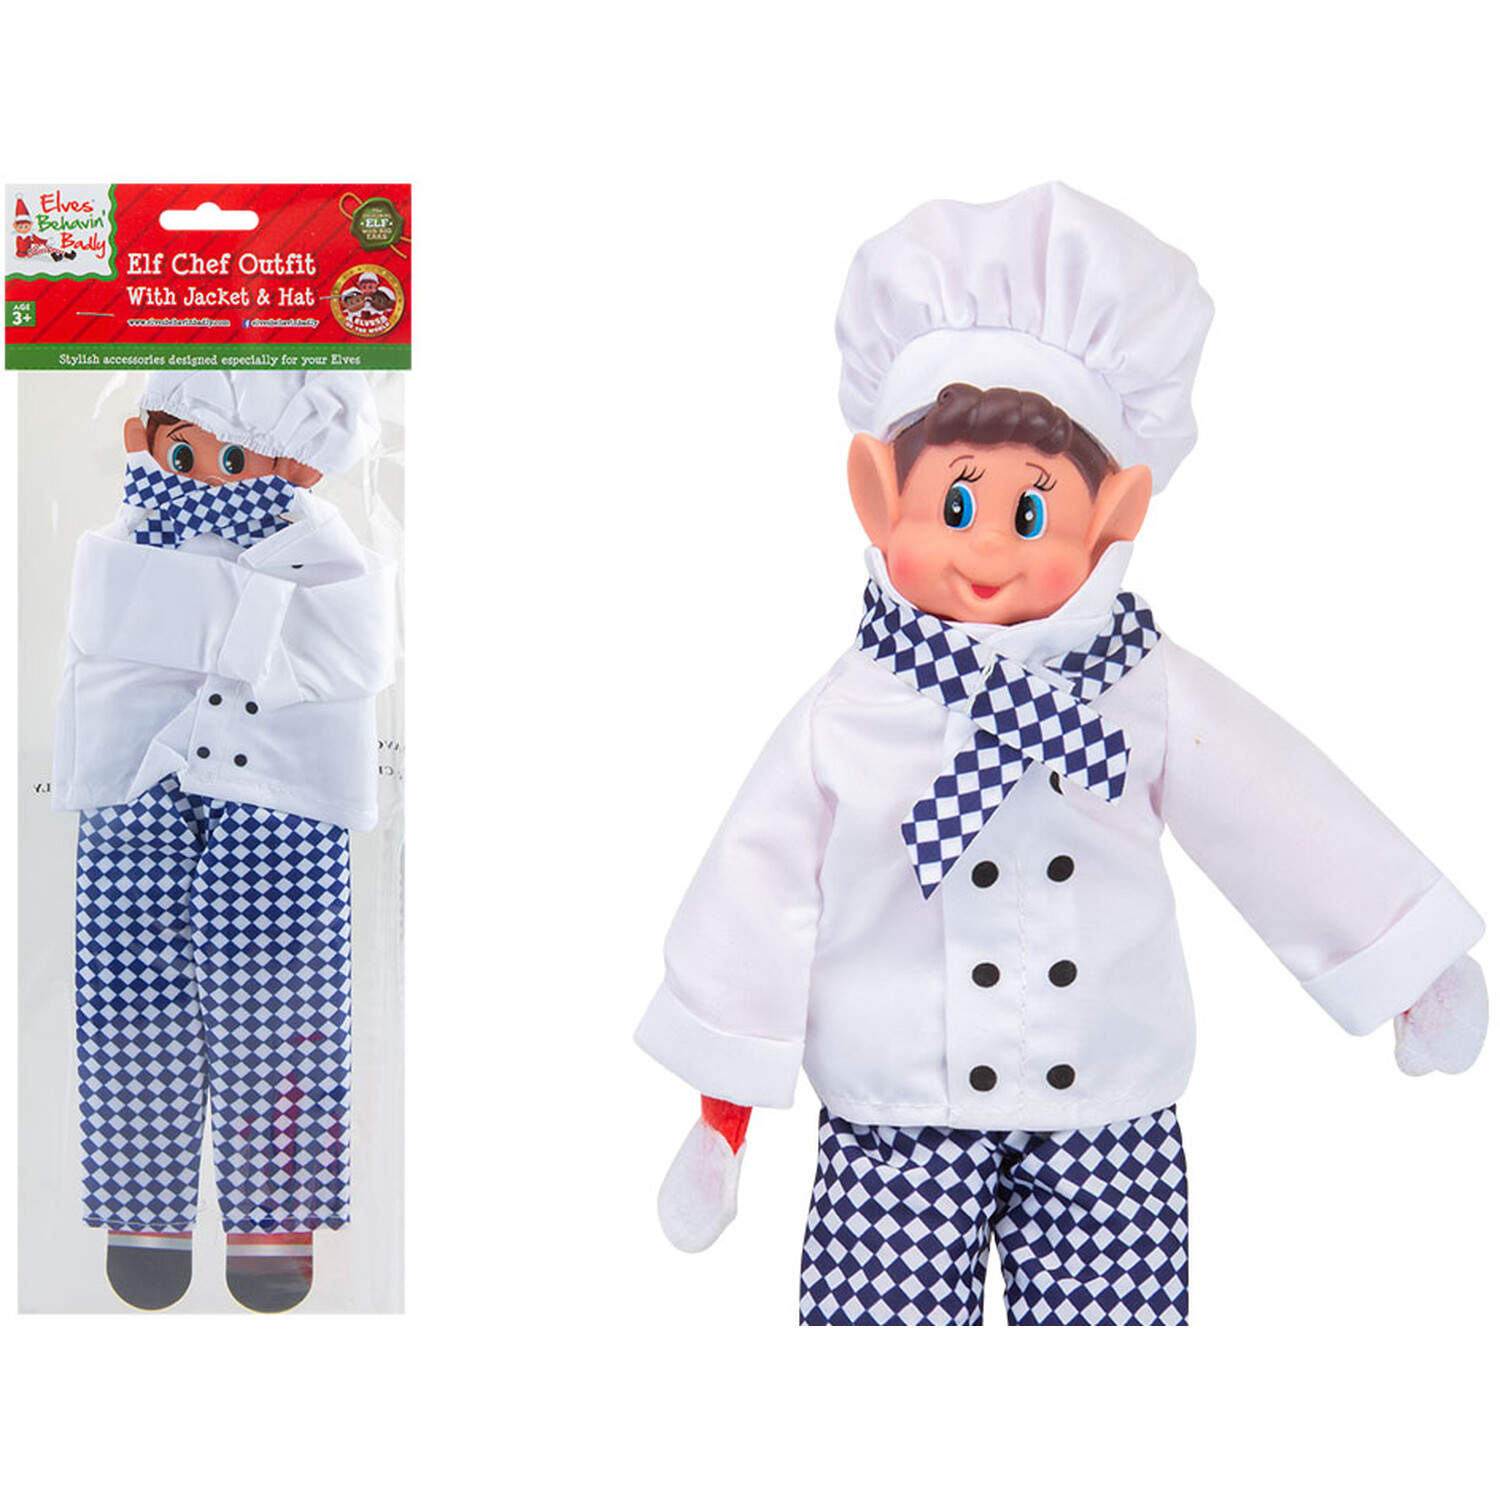 Elf Chef Outfit Image